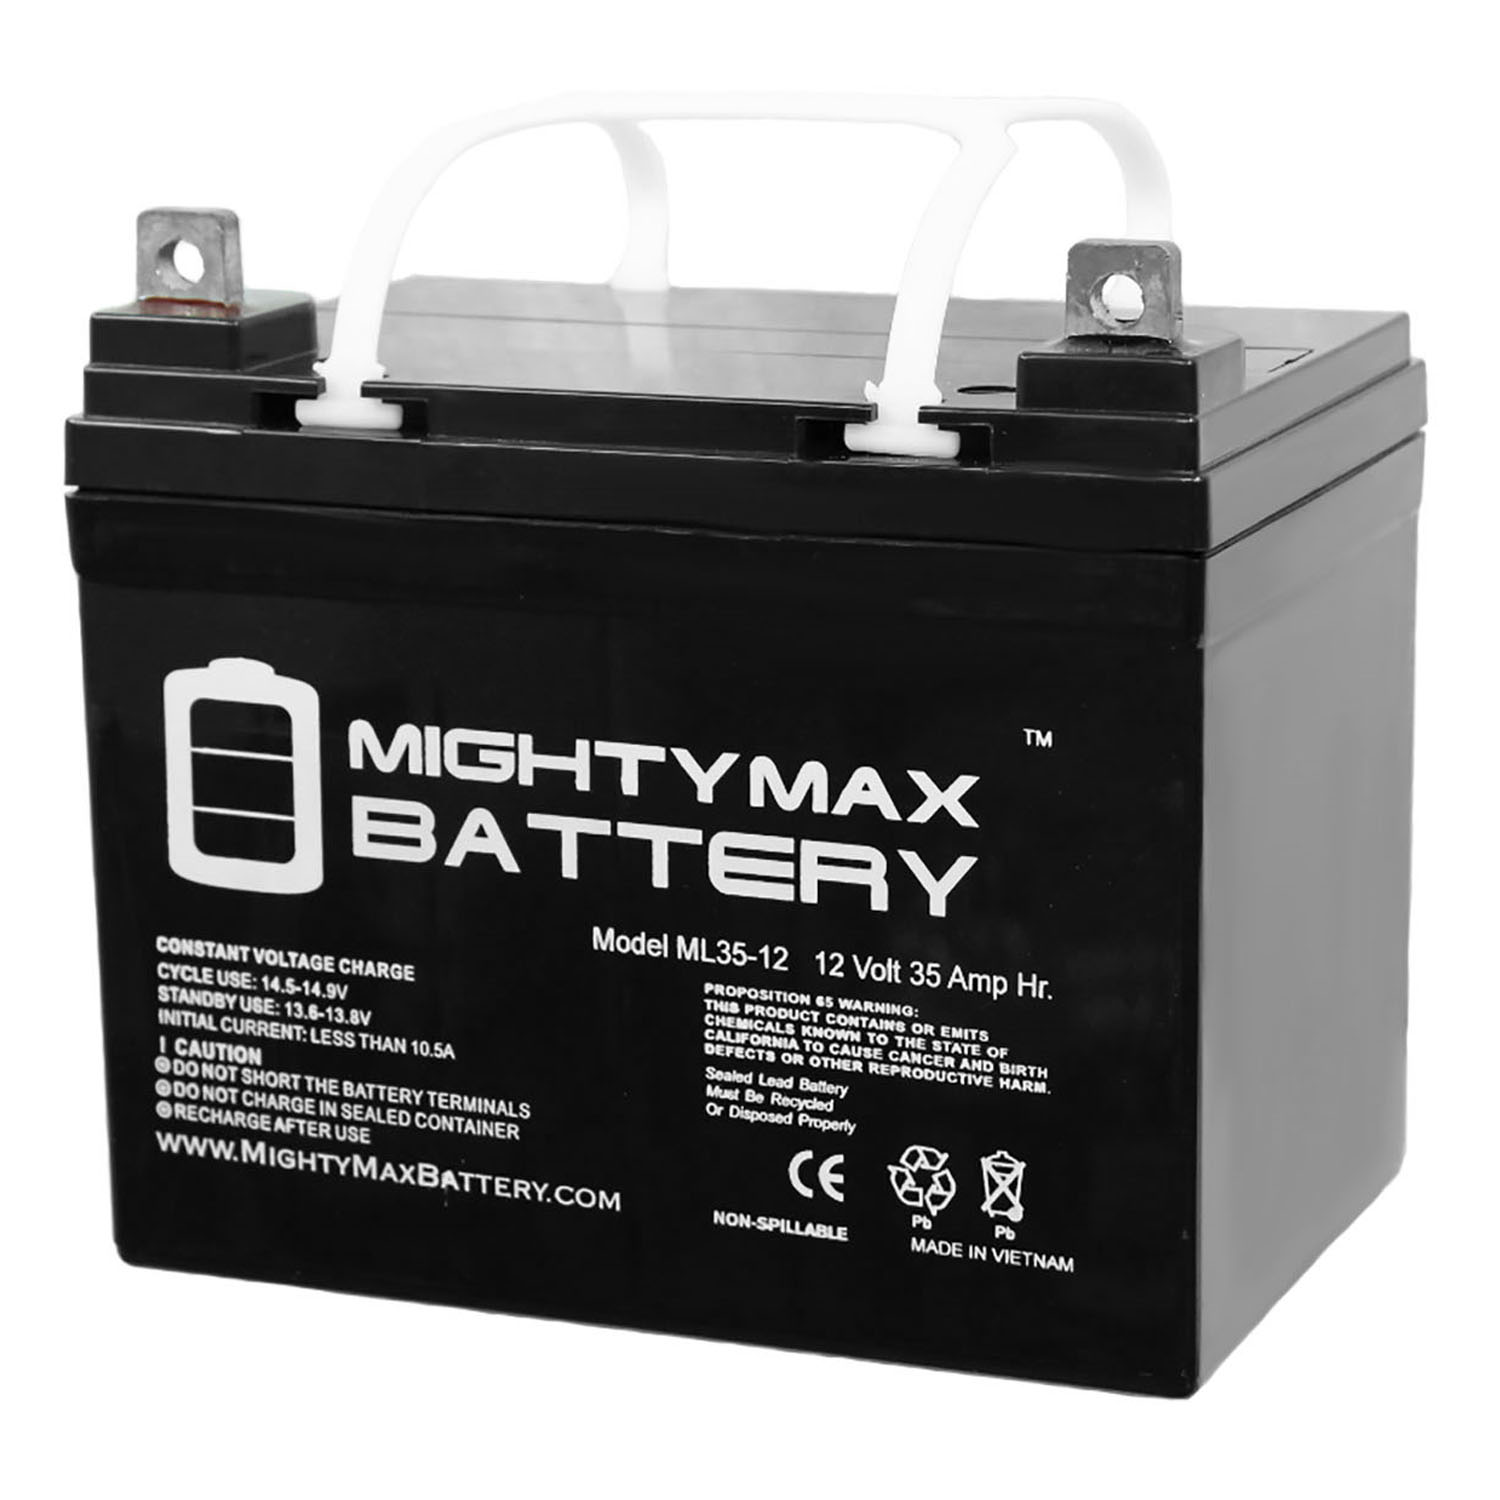 Mighty Max Battery Marine/Boat Battery Filler JUG Type Brand Product 